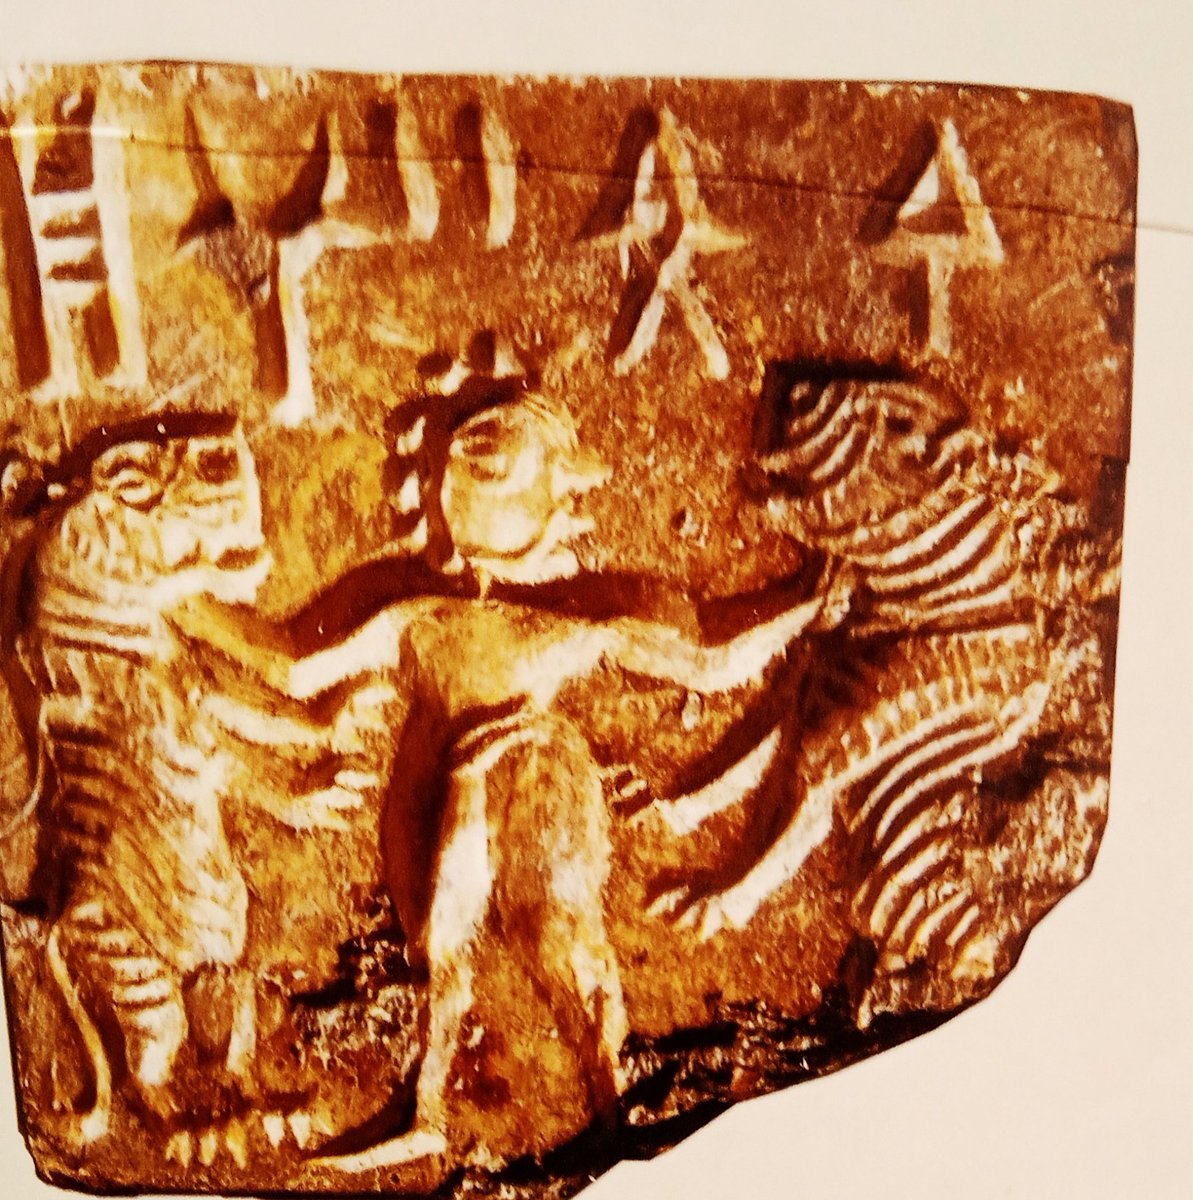 Gilgamesh seal, found from Mohan-Jo-Daro. This is a depiction of Gilgamesh, King of Uruk in c. 2600 BCE. Aa per the fragment of the story in Hittite, Gilgamesh was 16 feet tall & could fight with two tigers. The seal is presently at National Museum.